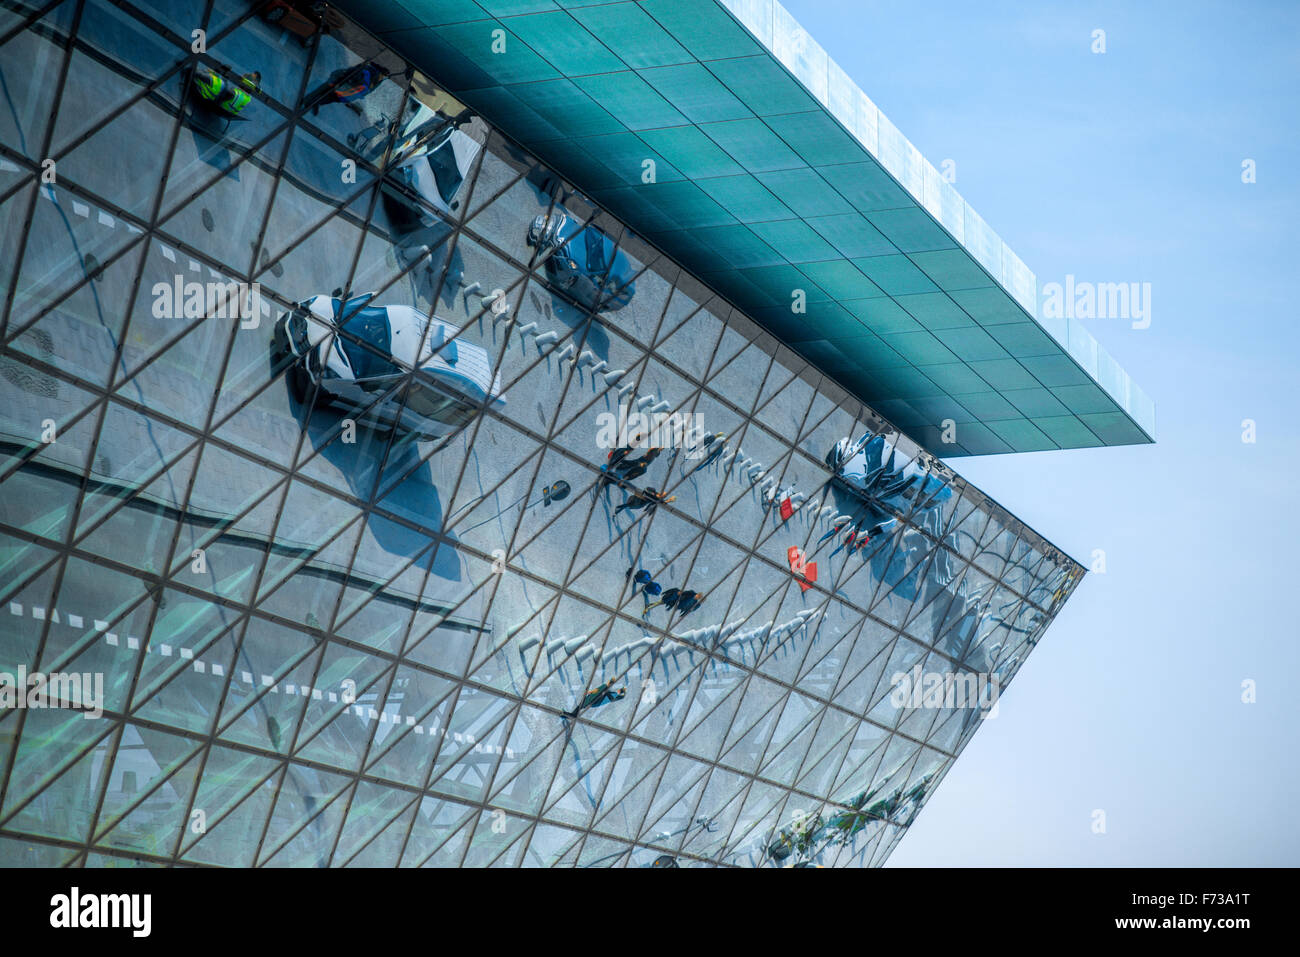 Modern airport terminal facade with cars and people's reflections Stock Photo